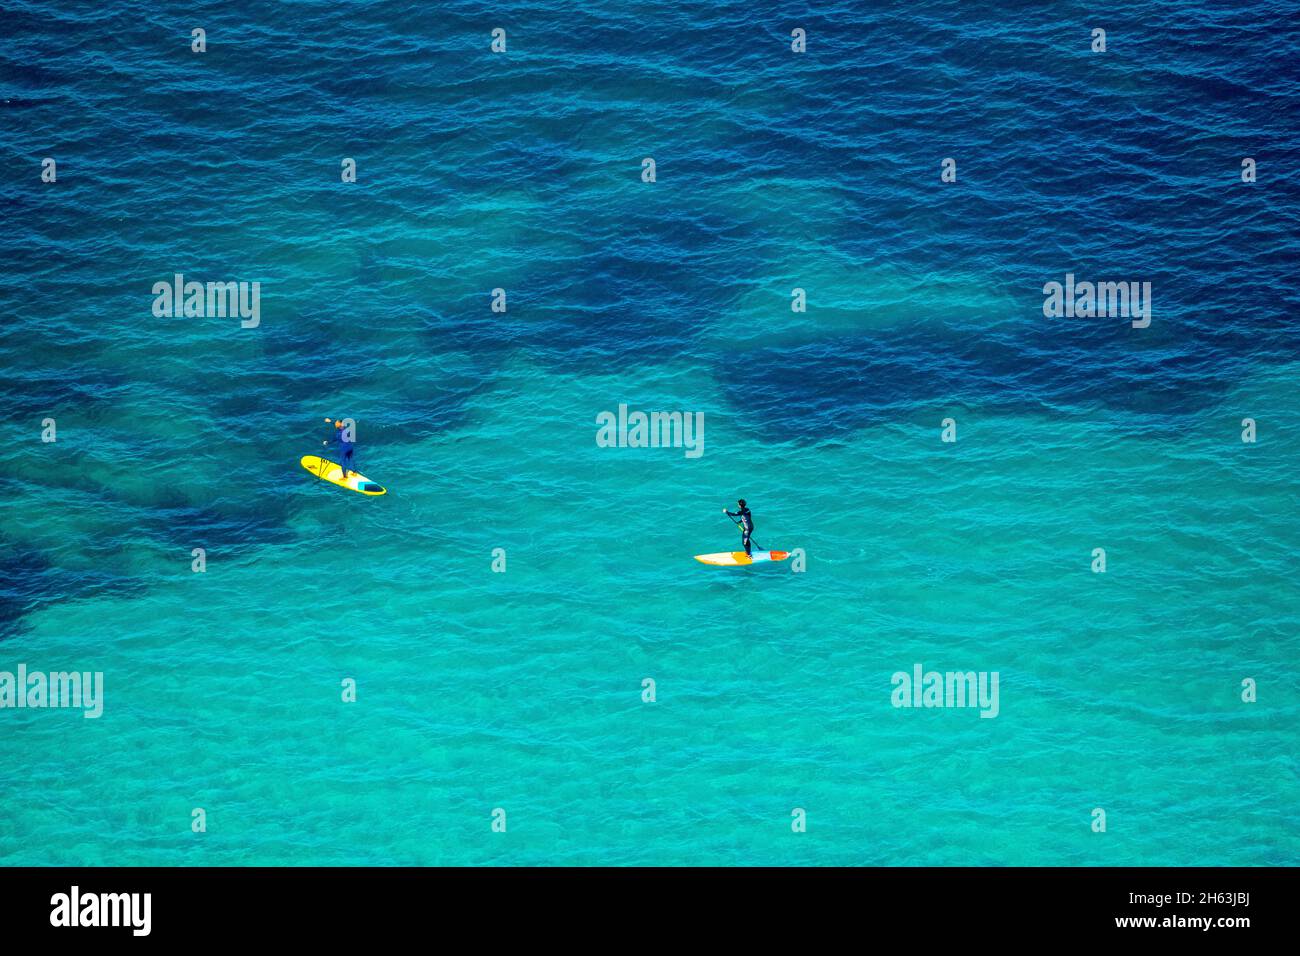 aerial view,standup paddler in the turquoise blue water,sandy beach of can picafort,illes balears,can picafort,mallorca,balearic island,balearic islands,baleares,spain Stock Photo